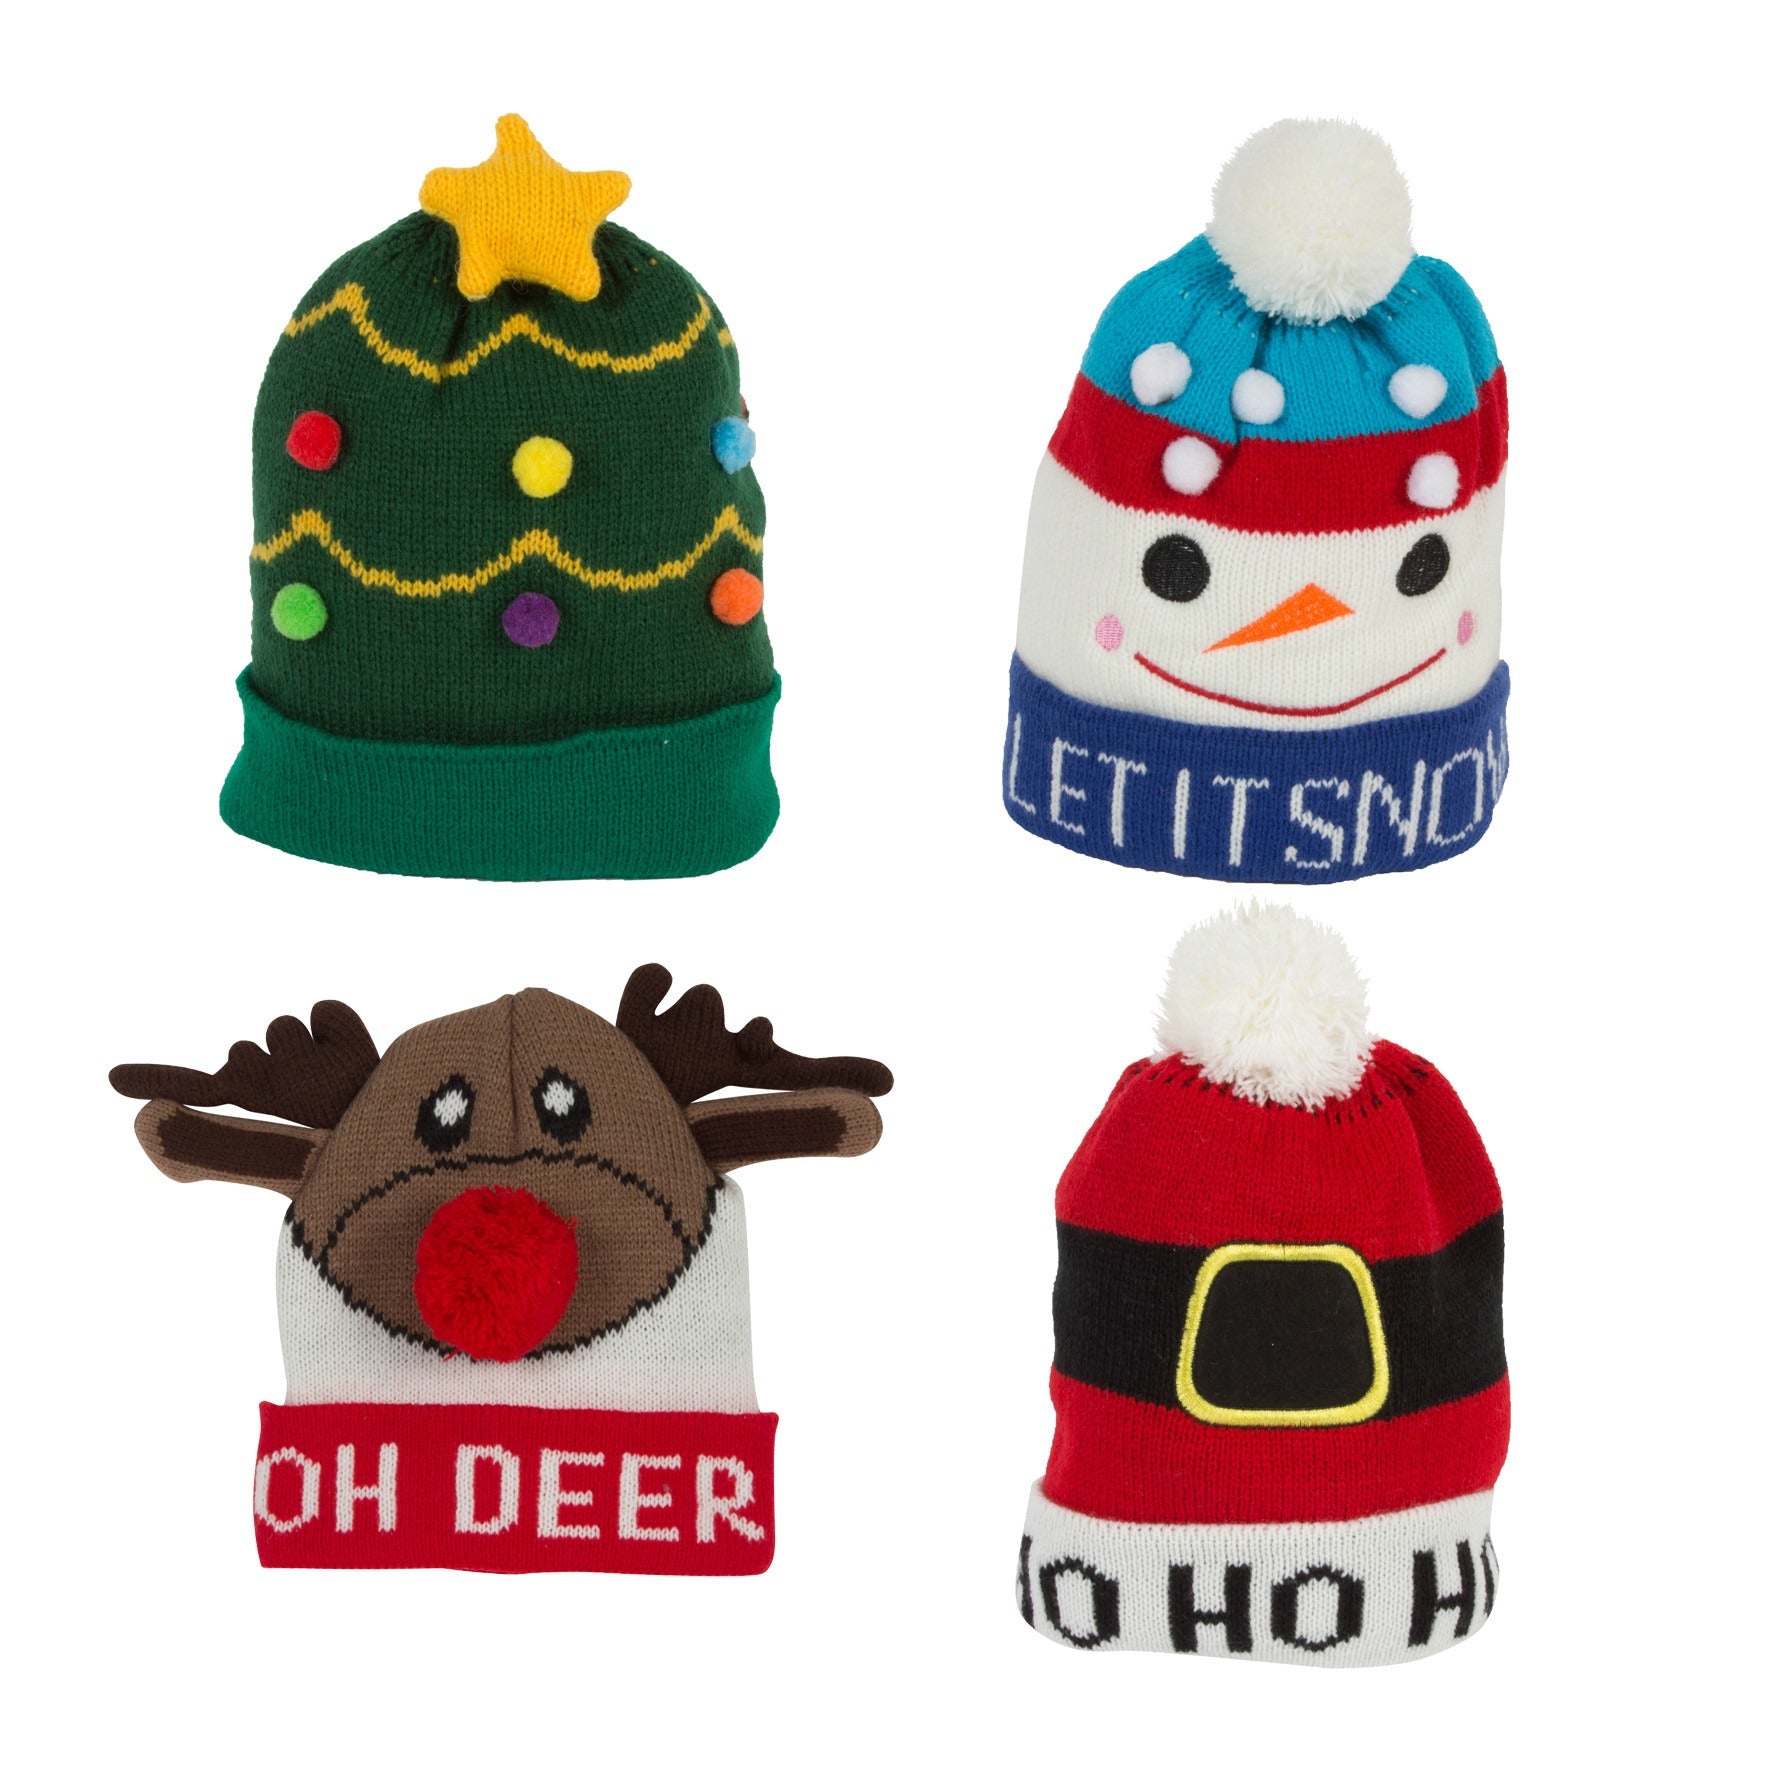 View Assorted Childs Knitted Christmas Hat information